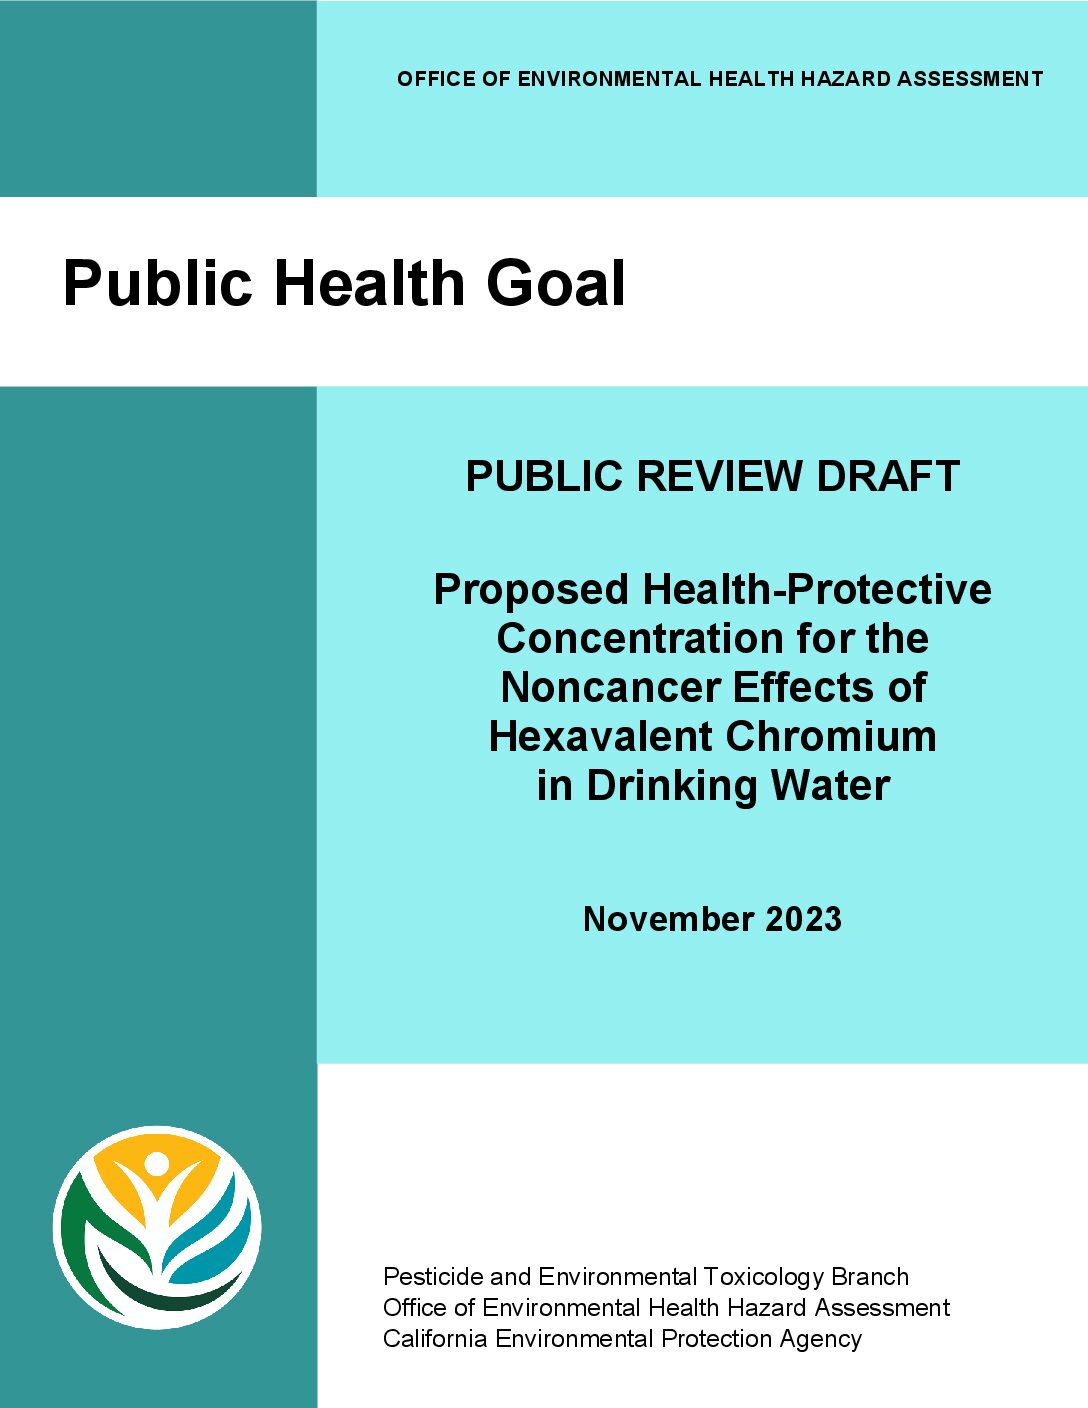 Proposed Health-Protective Concentration for the Noncancer Effects of Hexavalent Chromium in Drinking Water